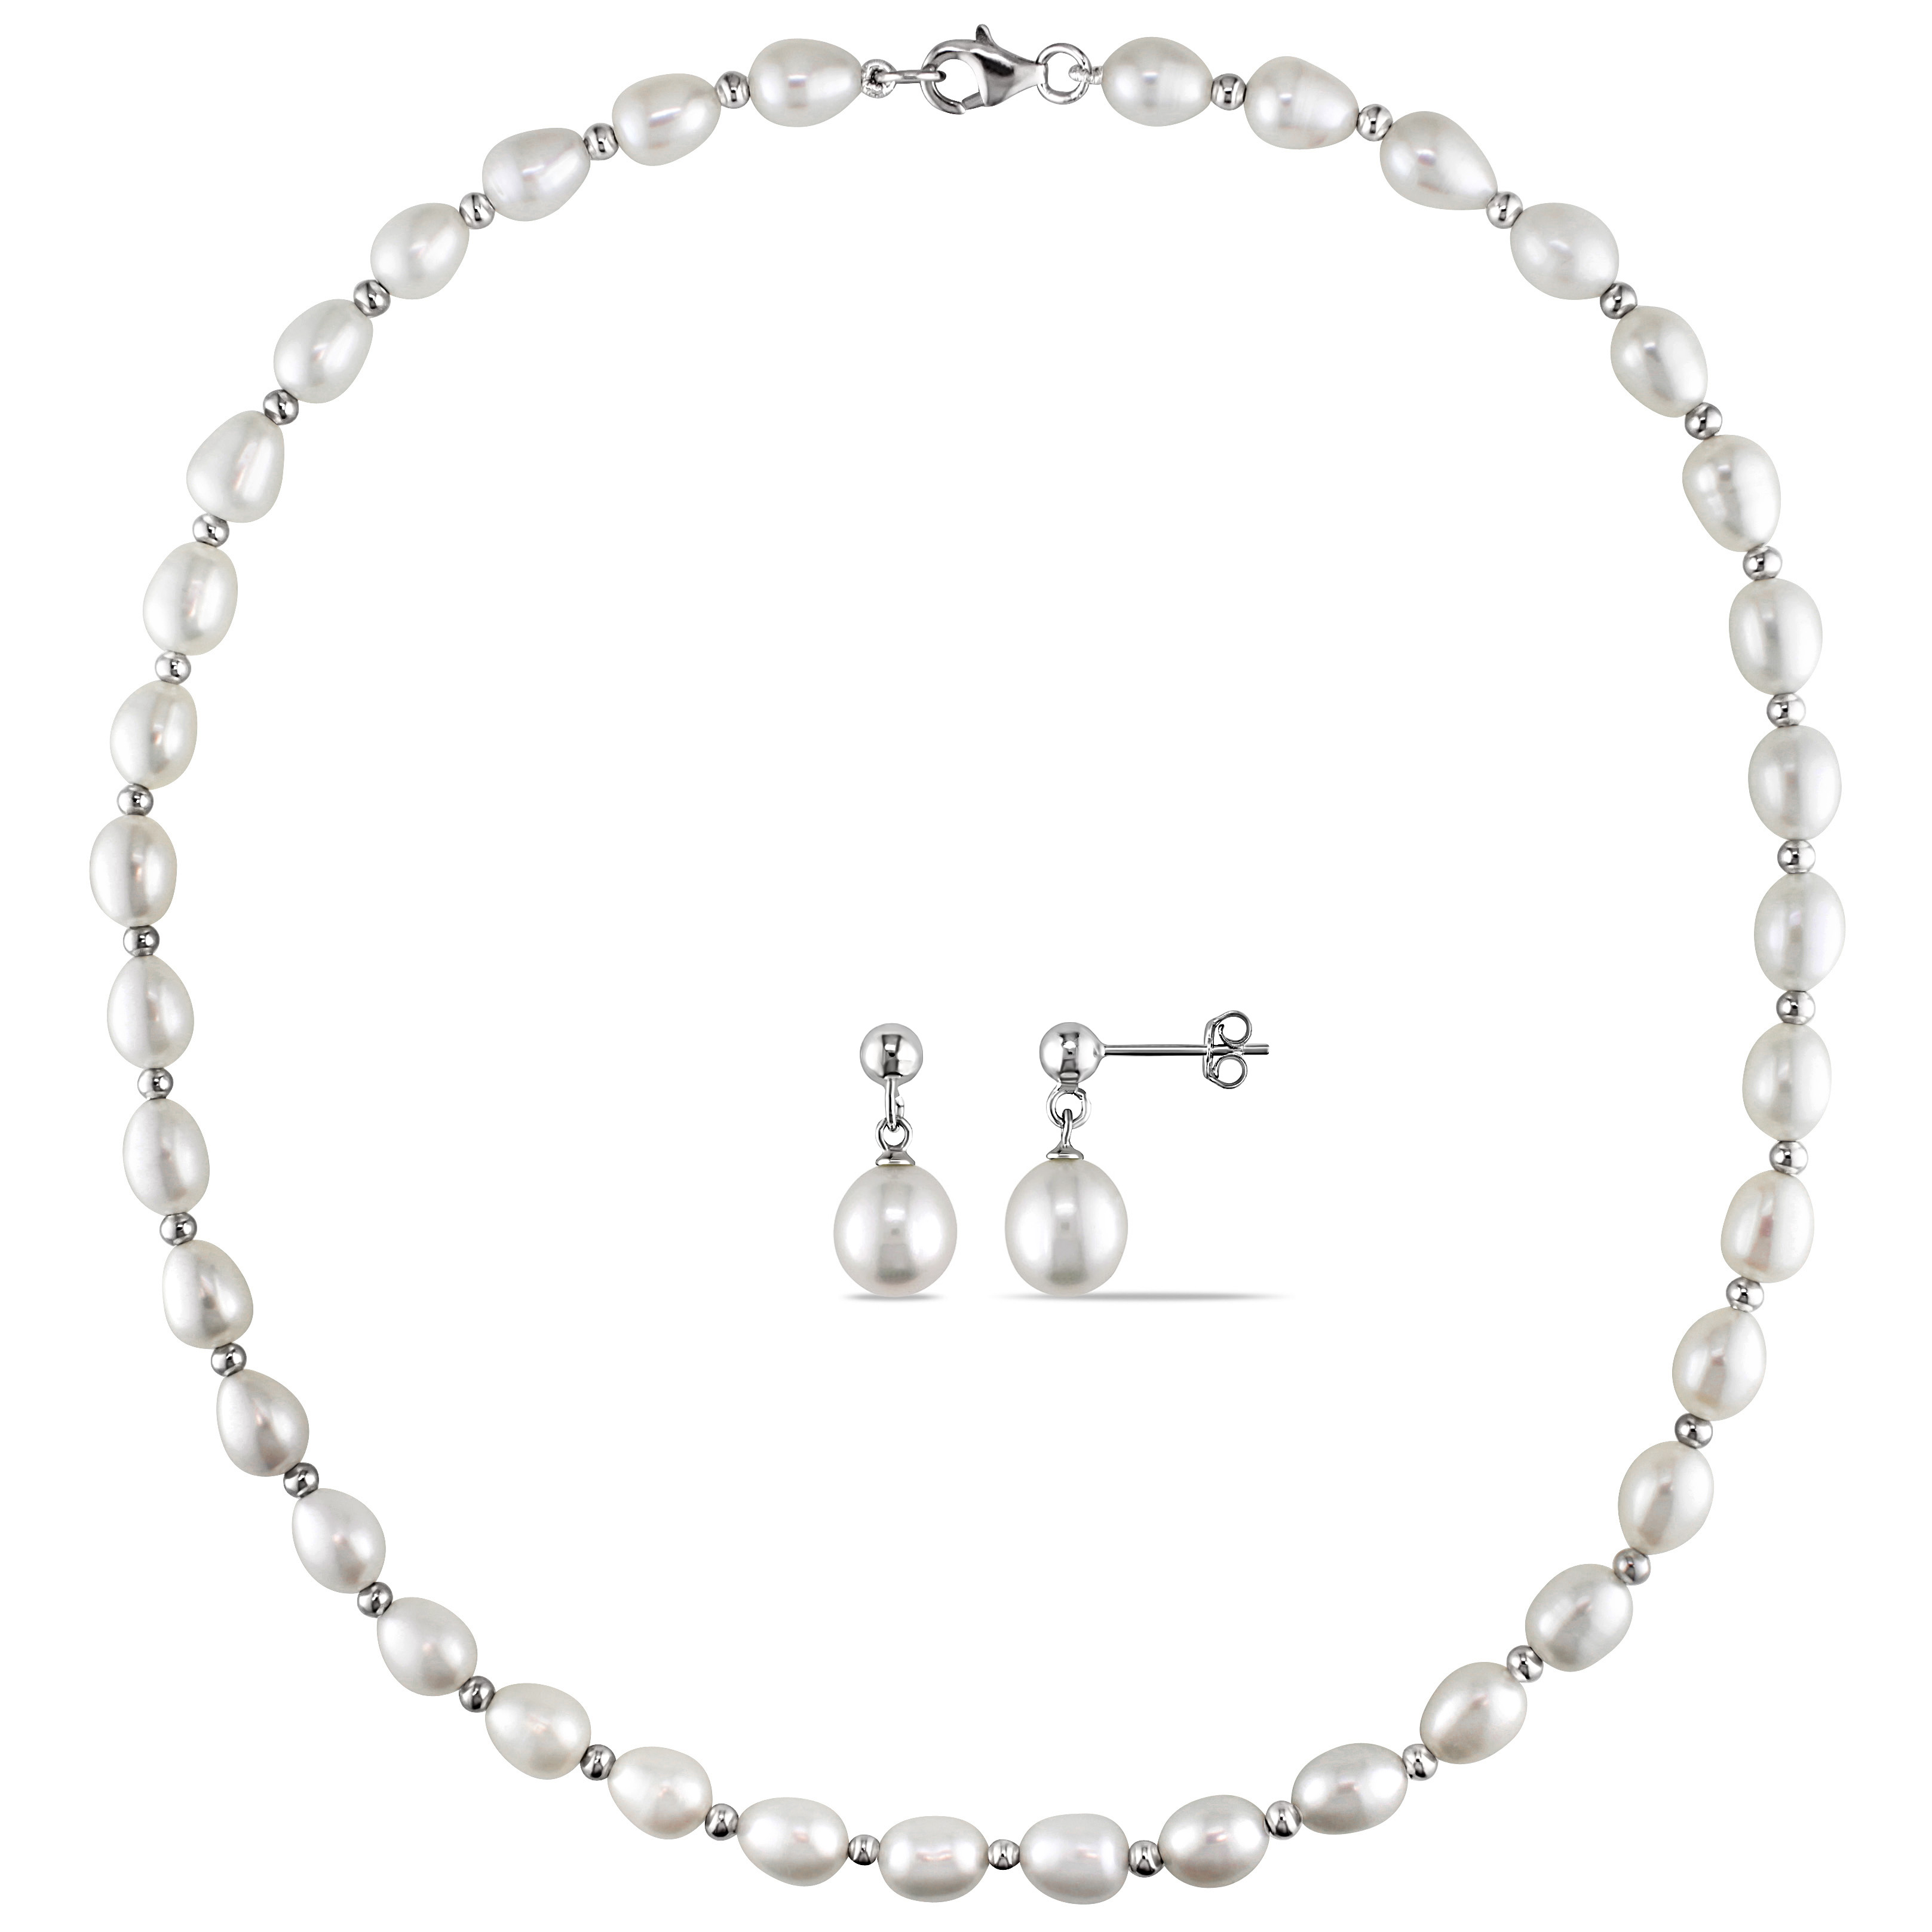 8-8.5 MM White Freshwater Cultured Pearl and Bead Strand and Stud Earring 2-Piece Set in Sterling Silver - 18 in.